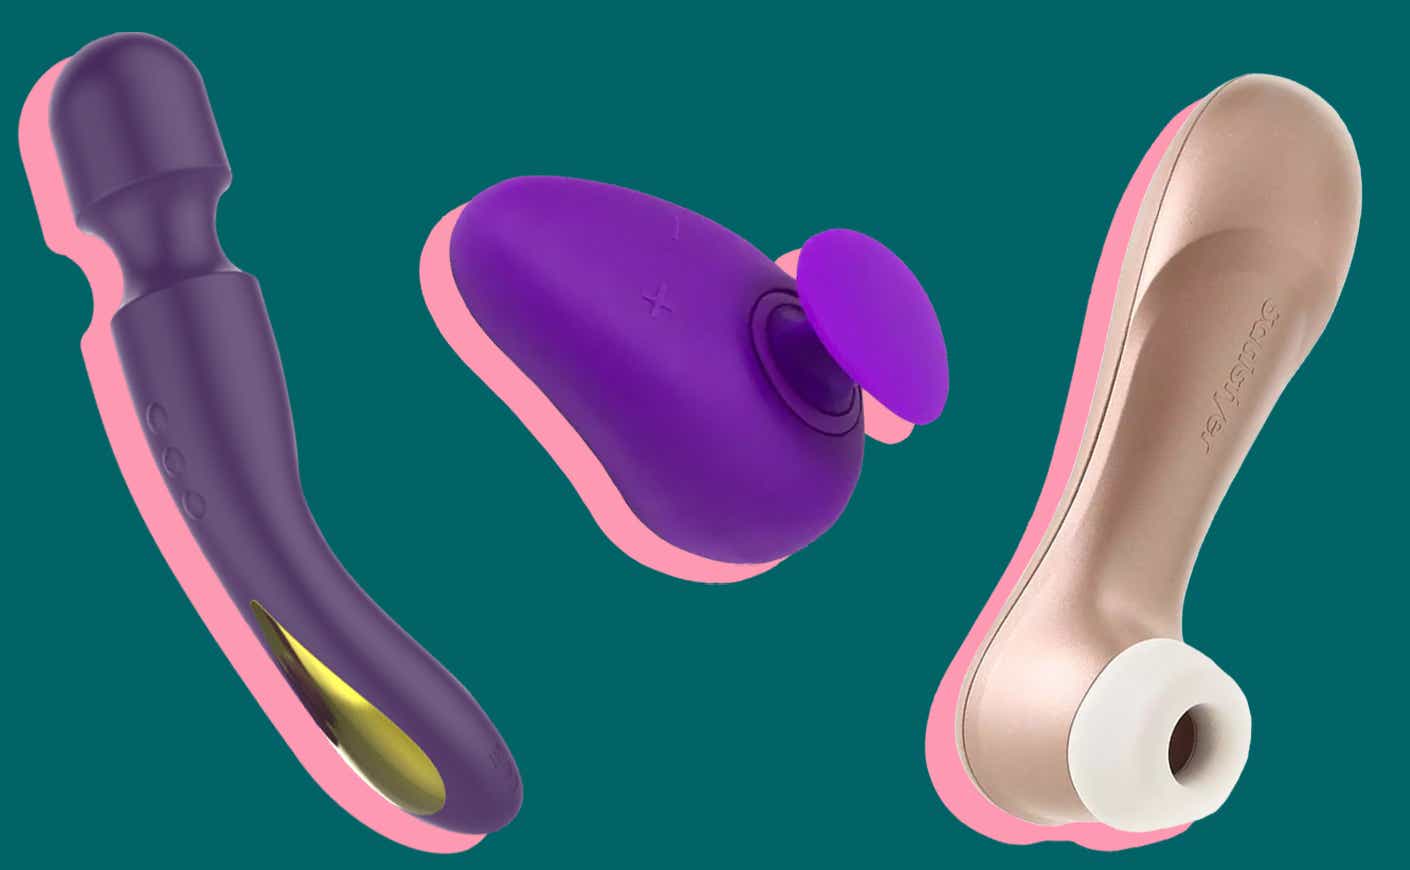 sex toys on teal background